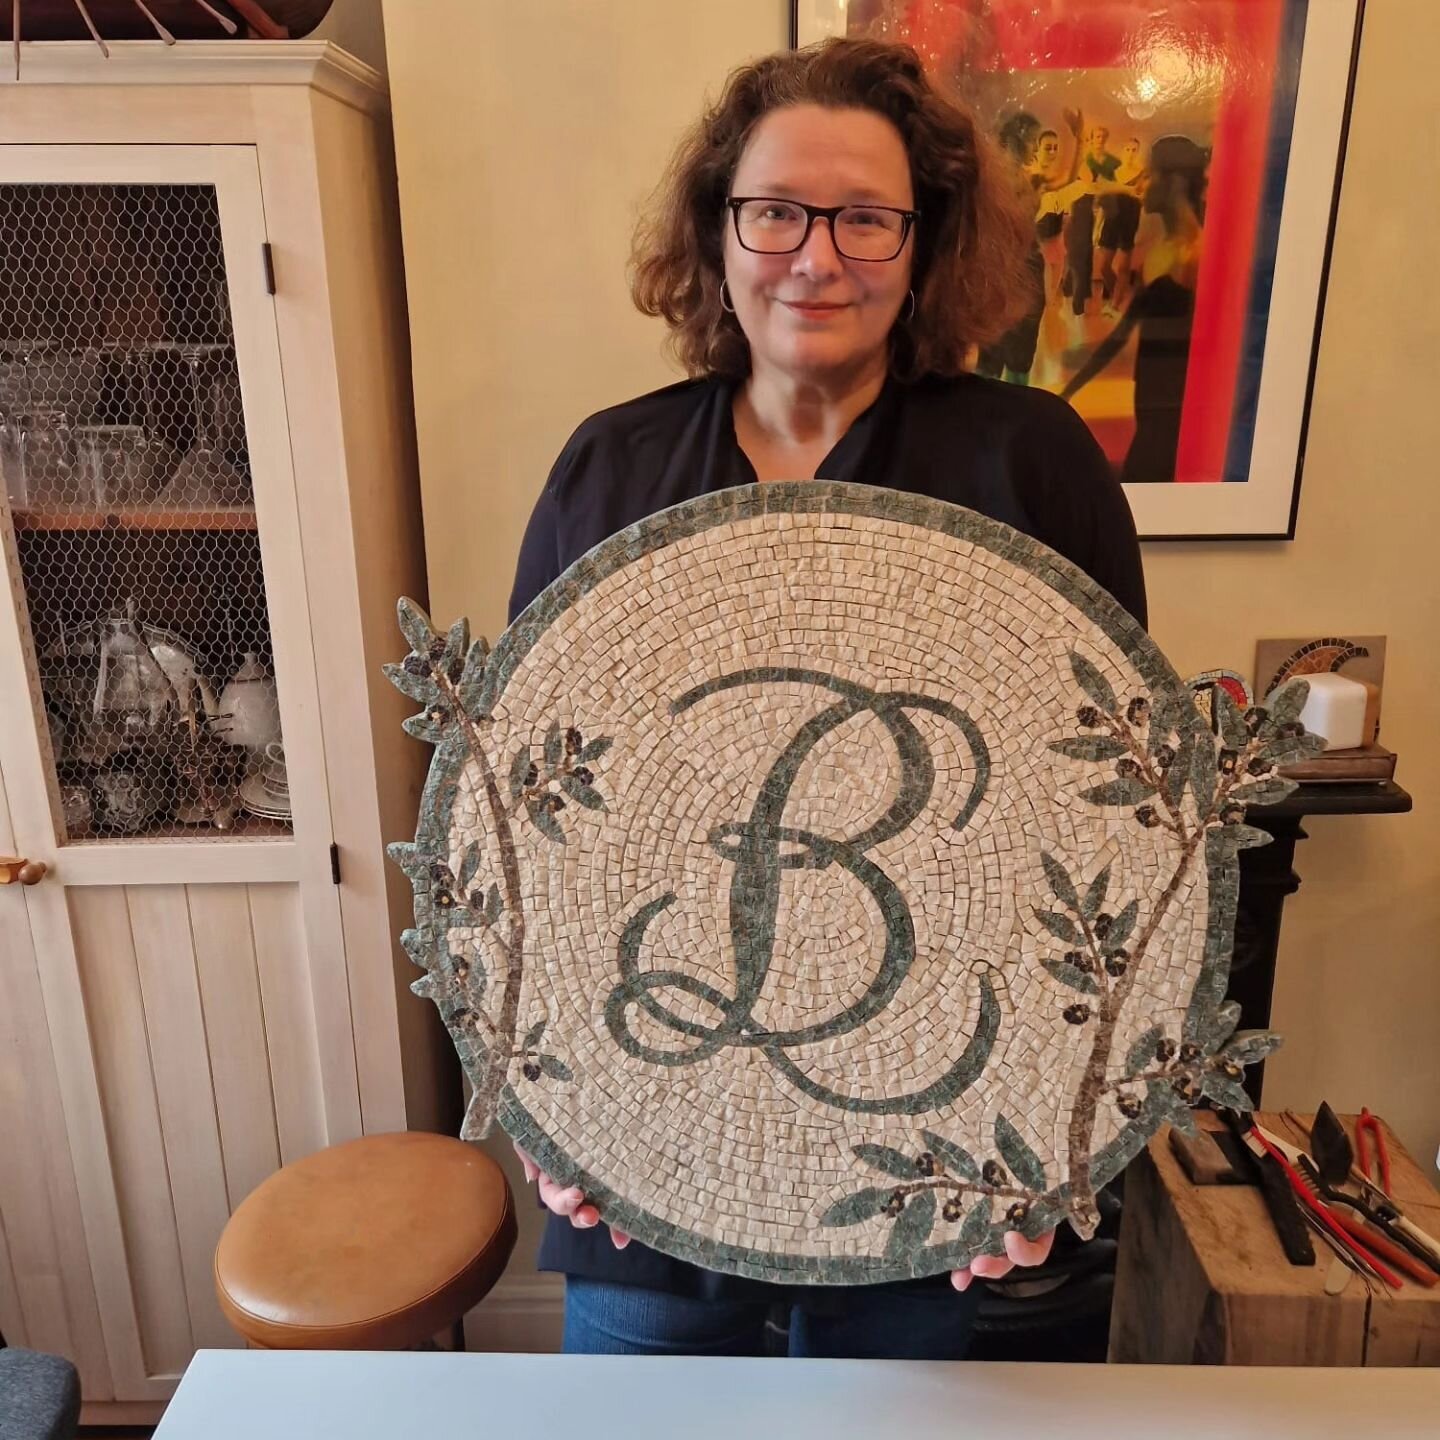 The logo mosaic for @basilleafdeli is finished! I love making olive branches. They share a rough beauty and strength and sense of the ages with riven cut marble, don't they? Shout out to Lawrence from @romanmosaics for the marble. #mosaic #marble #ol